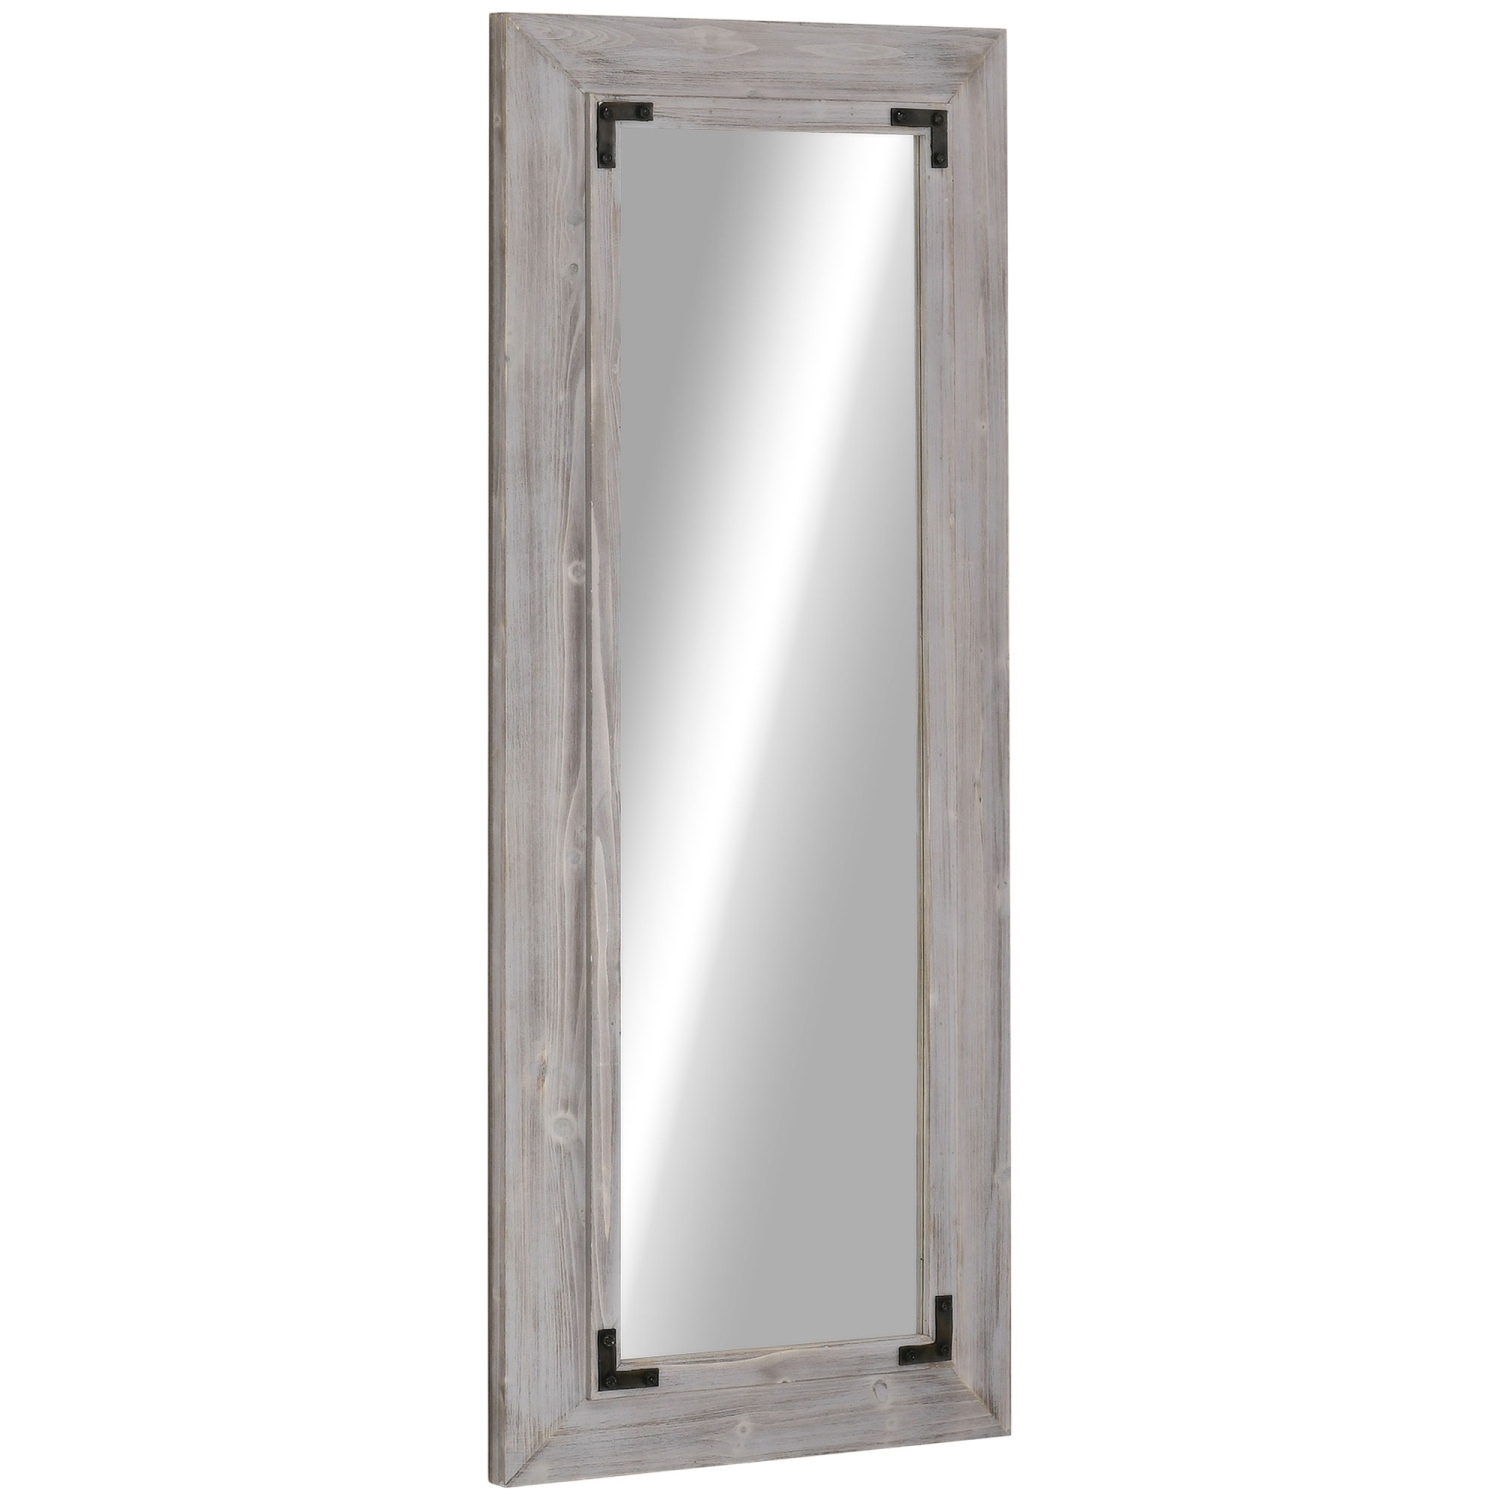 HOMCOM 59" x 23.5" Farmhouse Full Length Mirror, Wall Hang and Leaner Floor Mirror, Vertical and Horizontal, Distressed Wood Framed, for Living Room, Grey